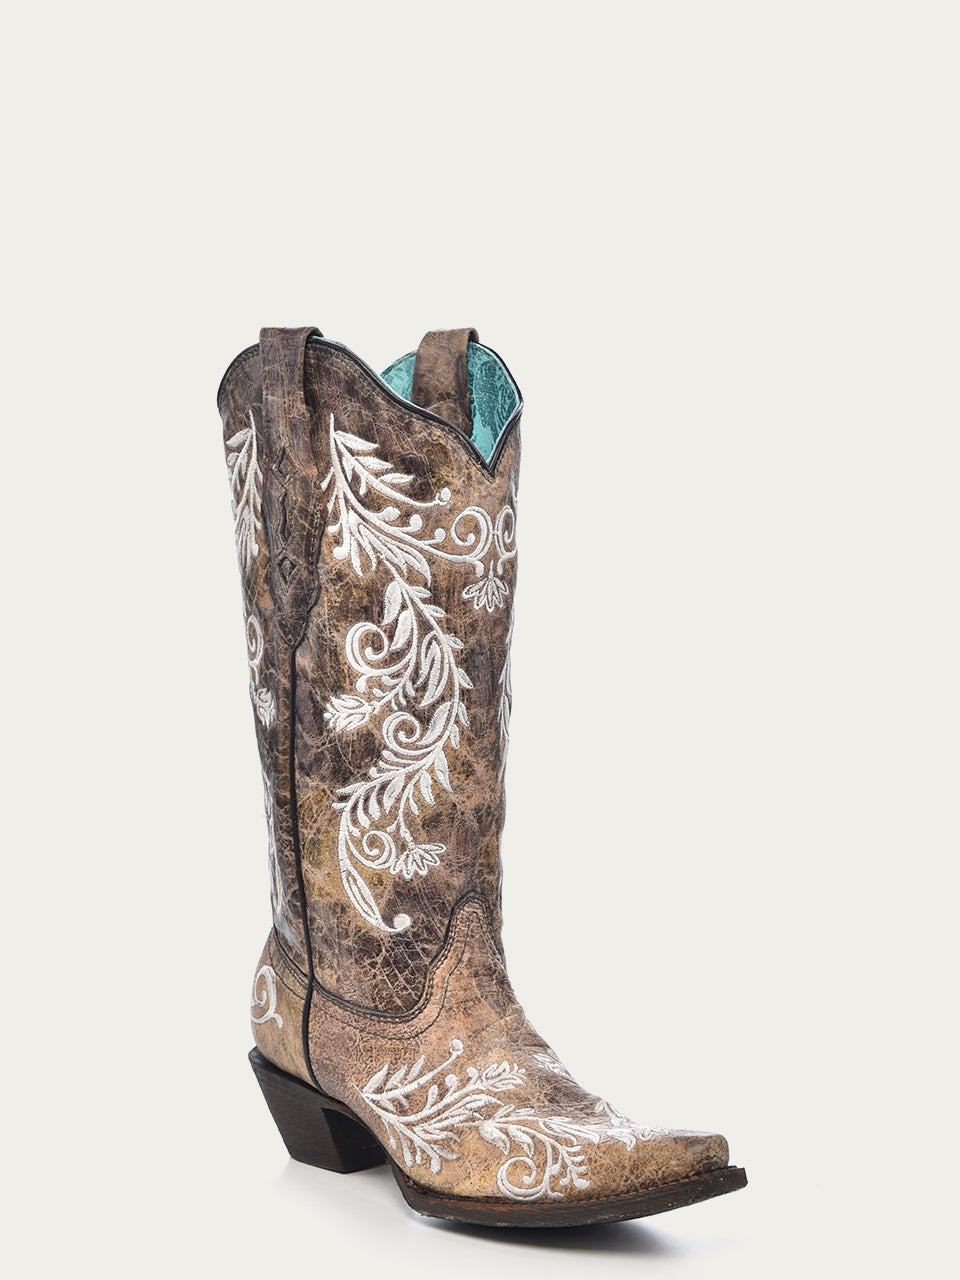 BLUE HONEY EMBROIDERY AND CRYSTALS women's boots C4124 – Corral